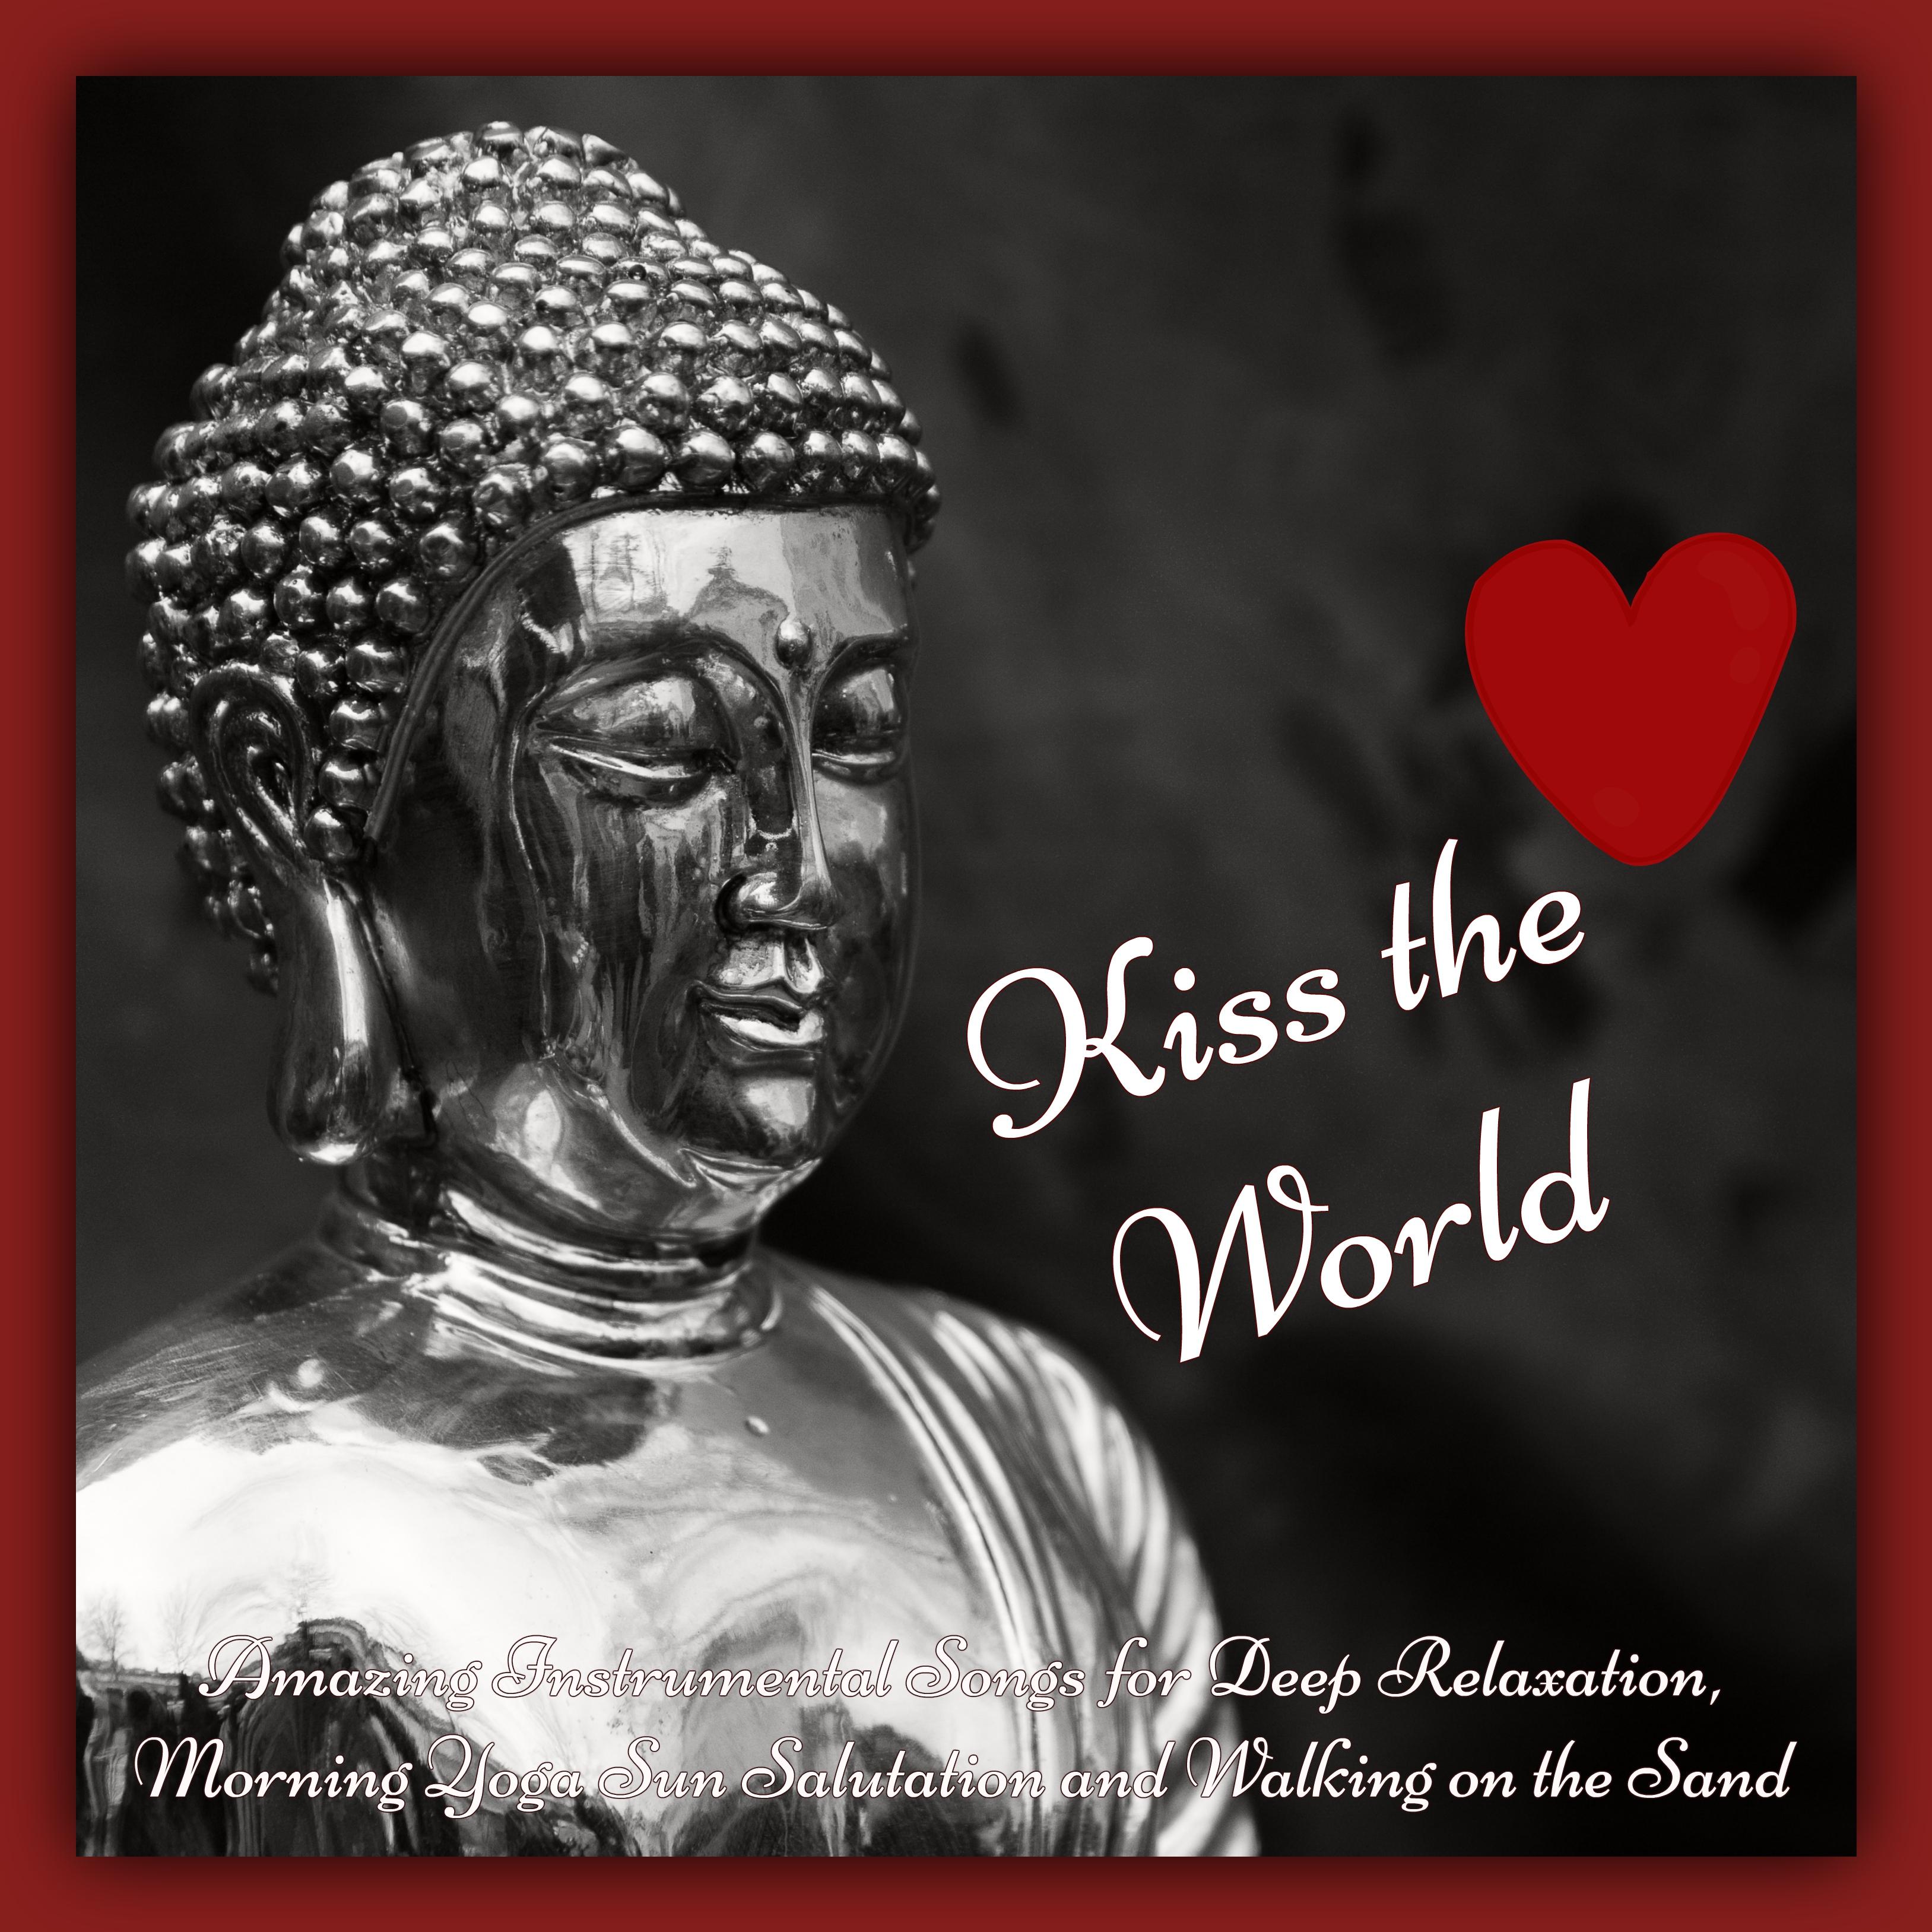 Kiss the World  Amazing Instrumental Songs for Deep Relaxation, Morning Yoga Sun Salutation and Walking on the Sand